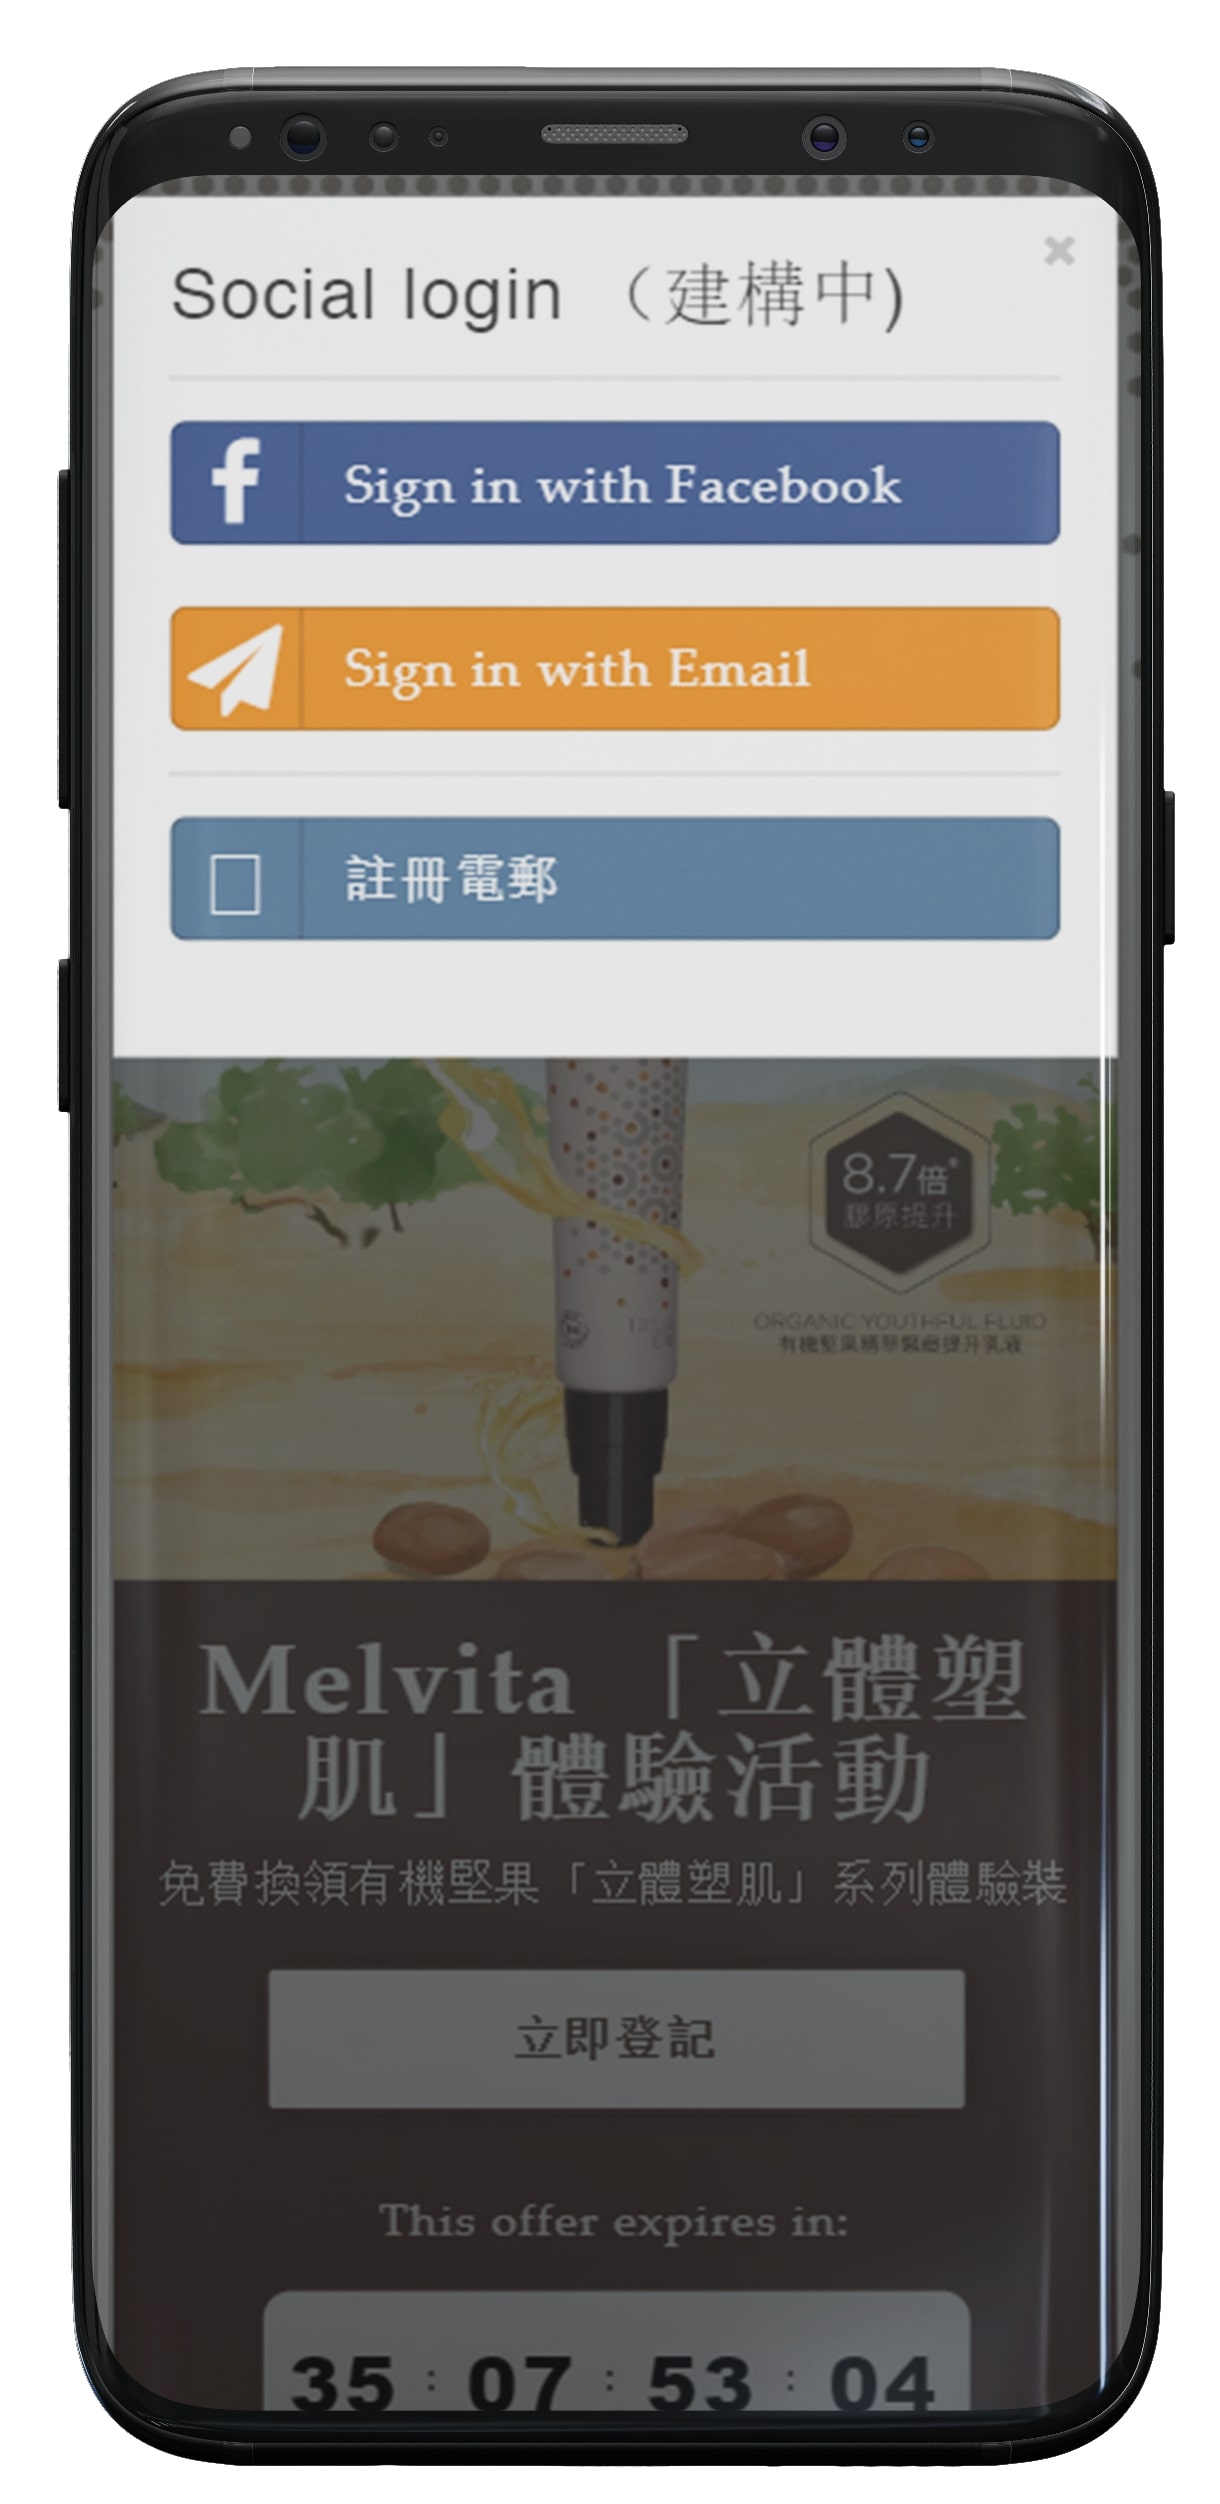 melvita - durable coupons use case image